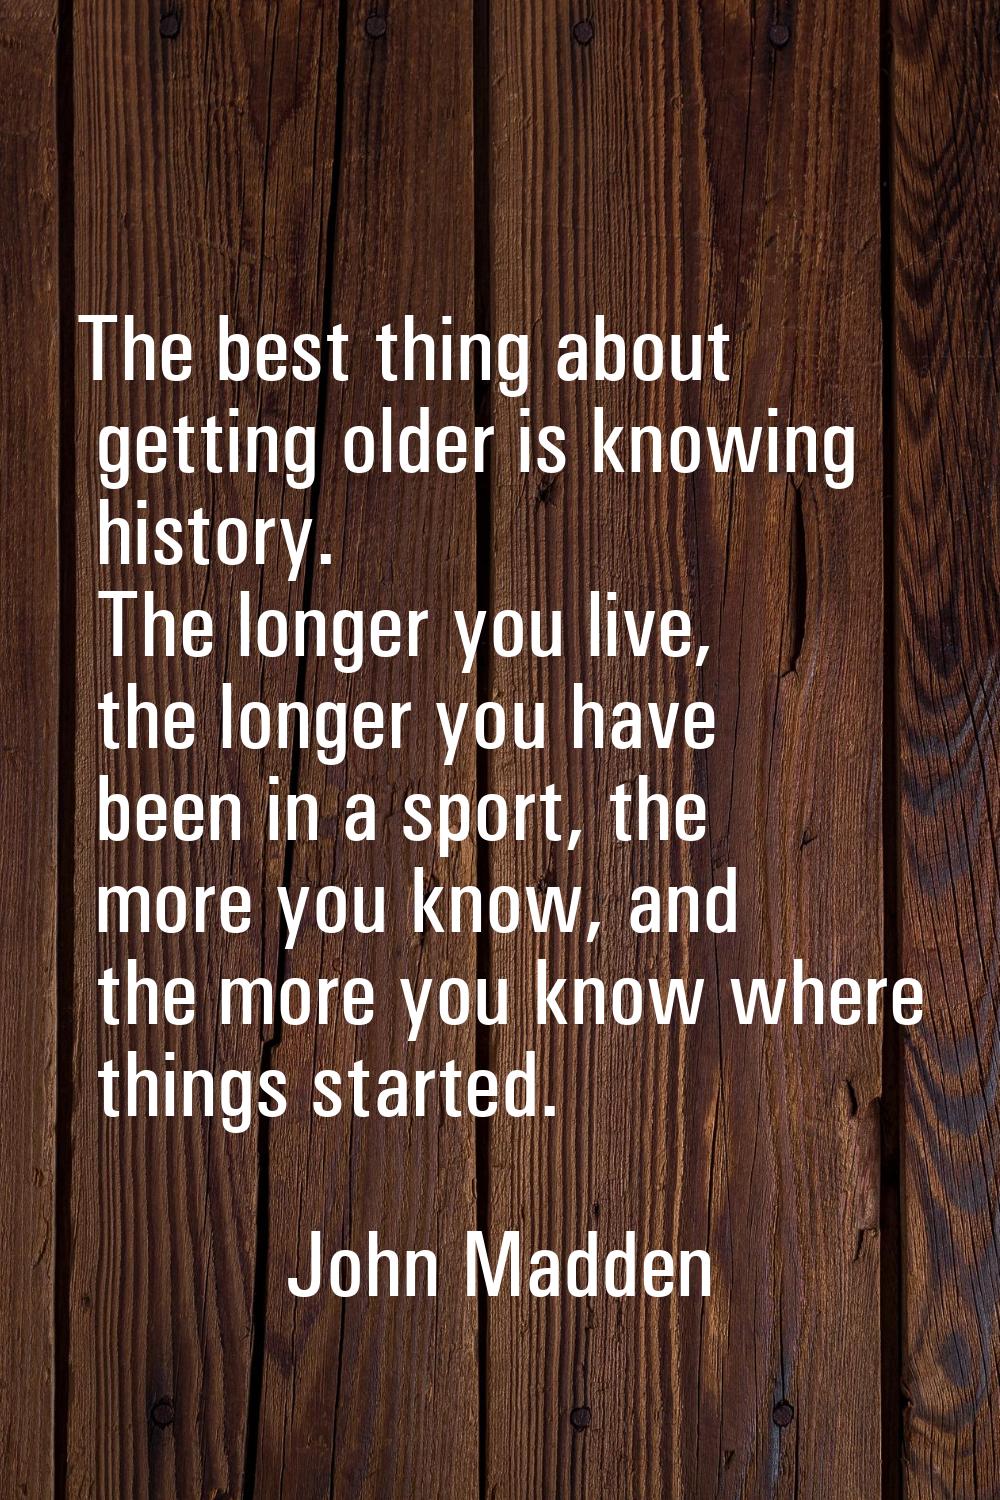 The best thing about getting older is knowing history. The longer you live, the longer you have bee